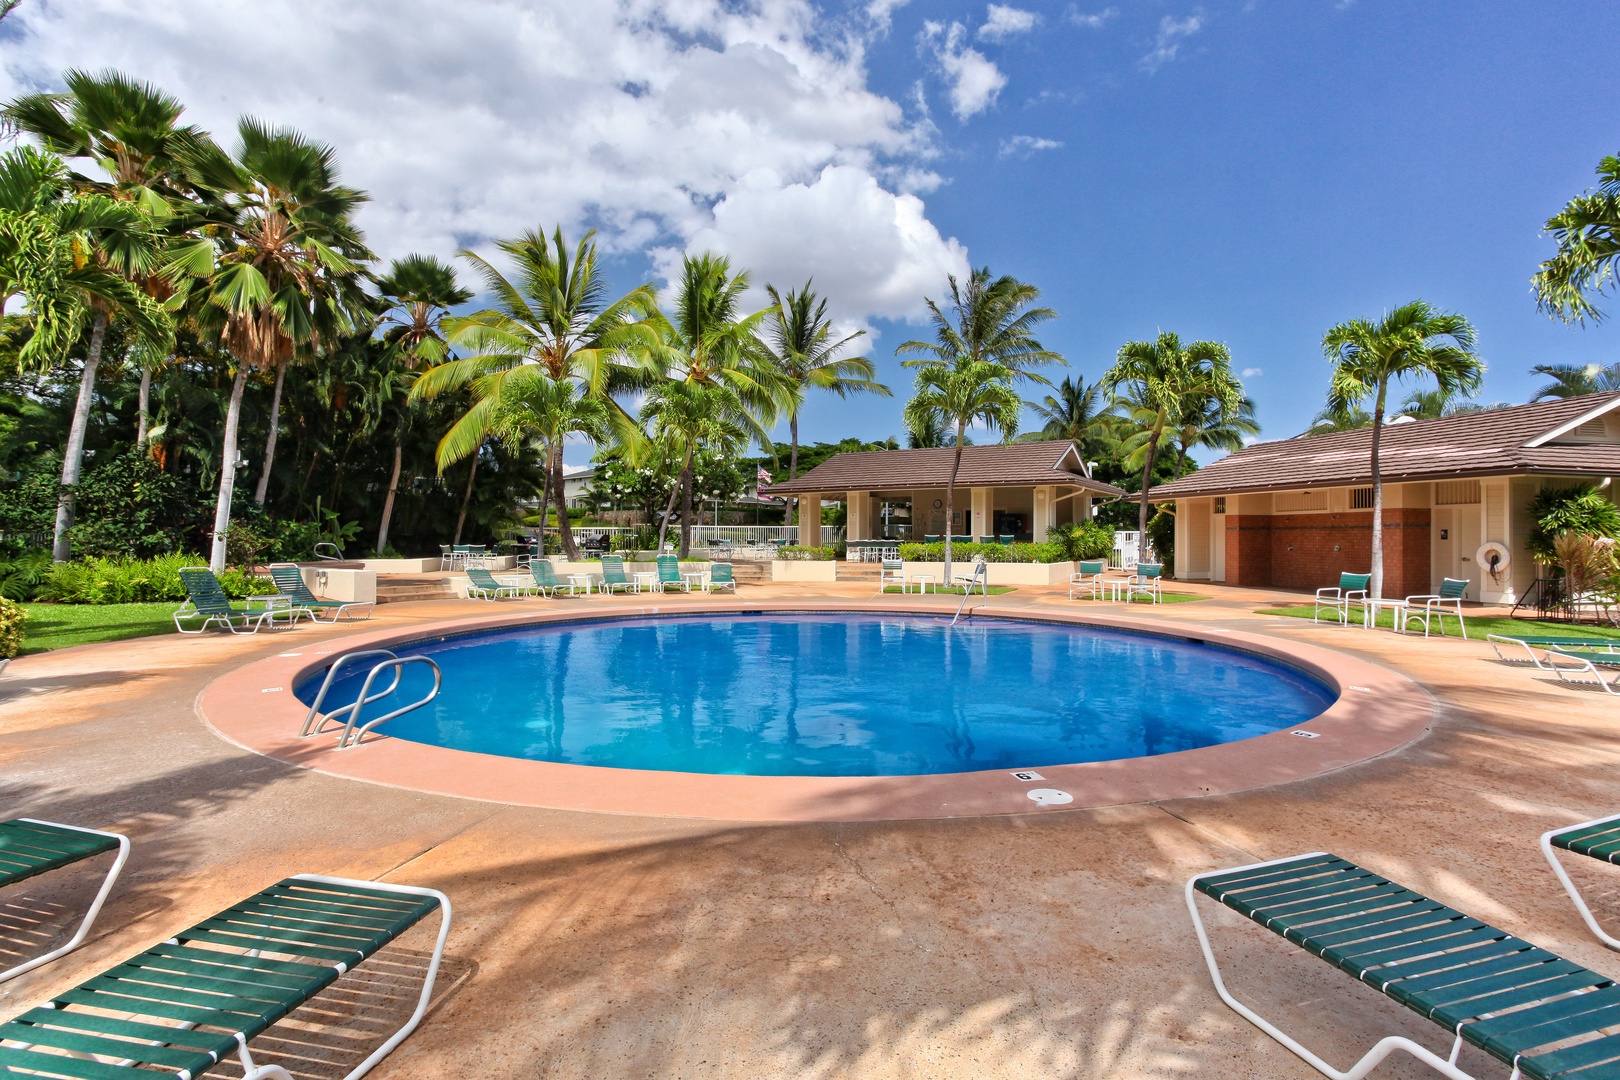 Kapolei Vacation Rentals, Fairways at Ko Olina 4A - Go for a swim in the sparkling waters and rest in the lounge chairs.